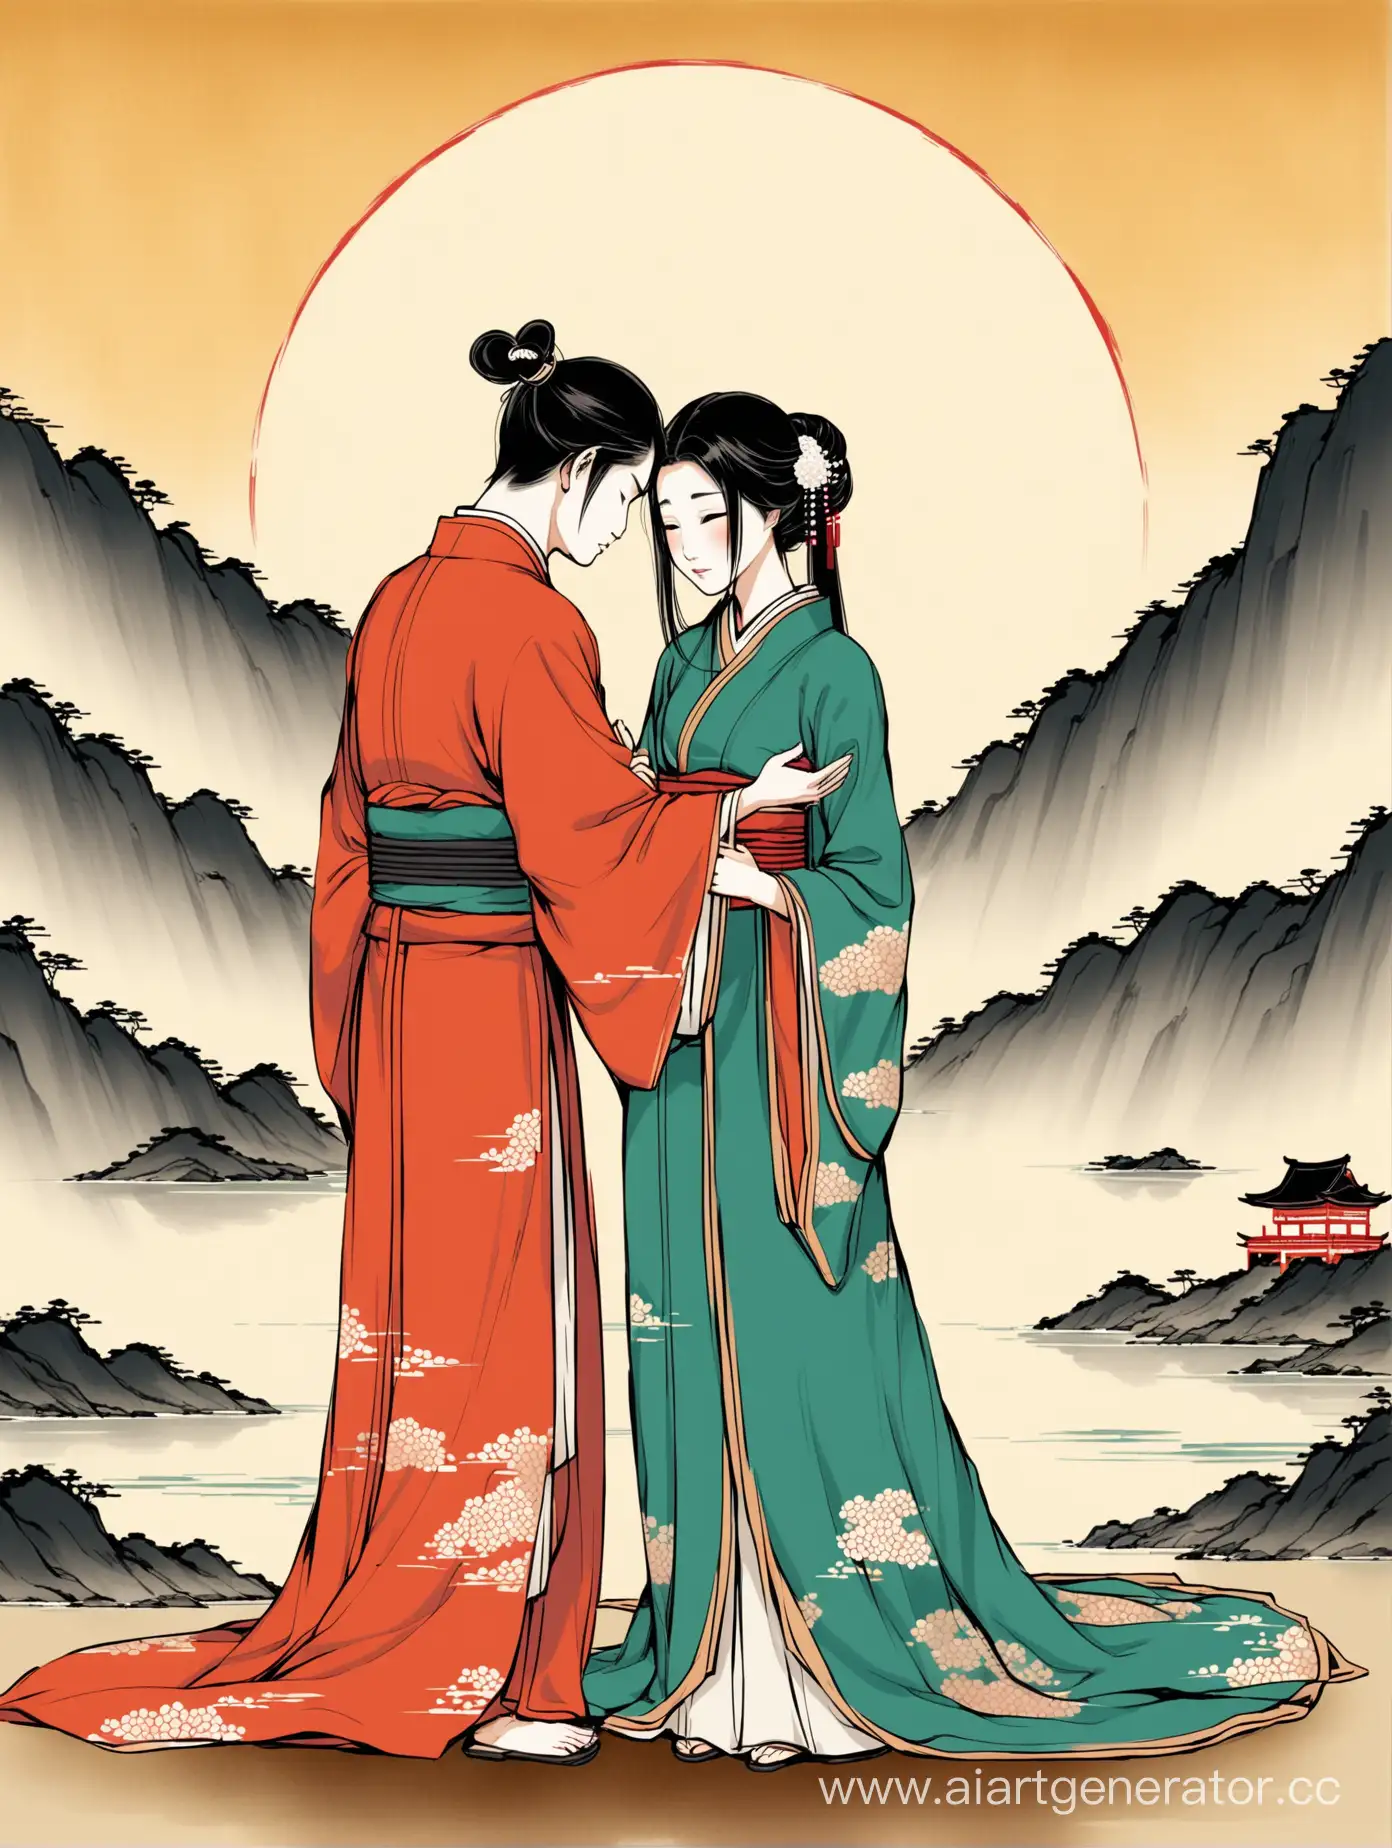 Farewell-of-a-Sad-Asian-Couple-Traditional-Painting-Style-Depiction